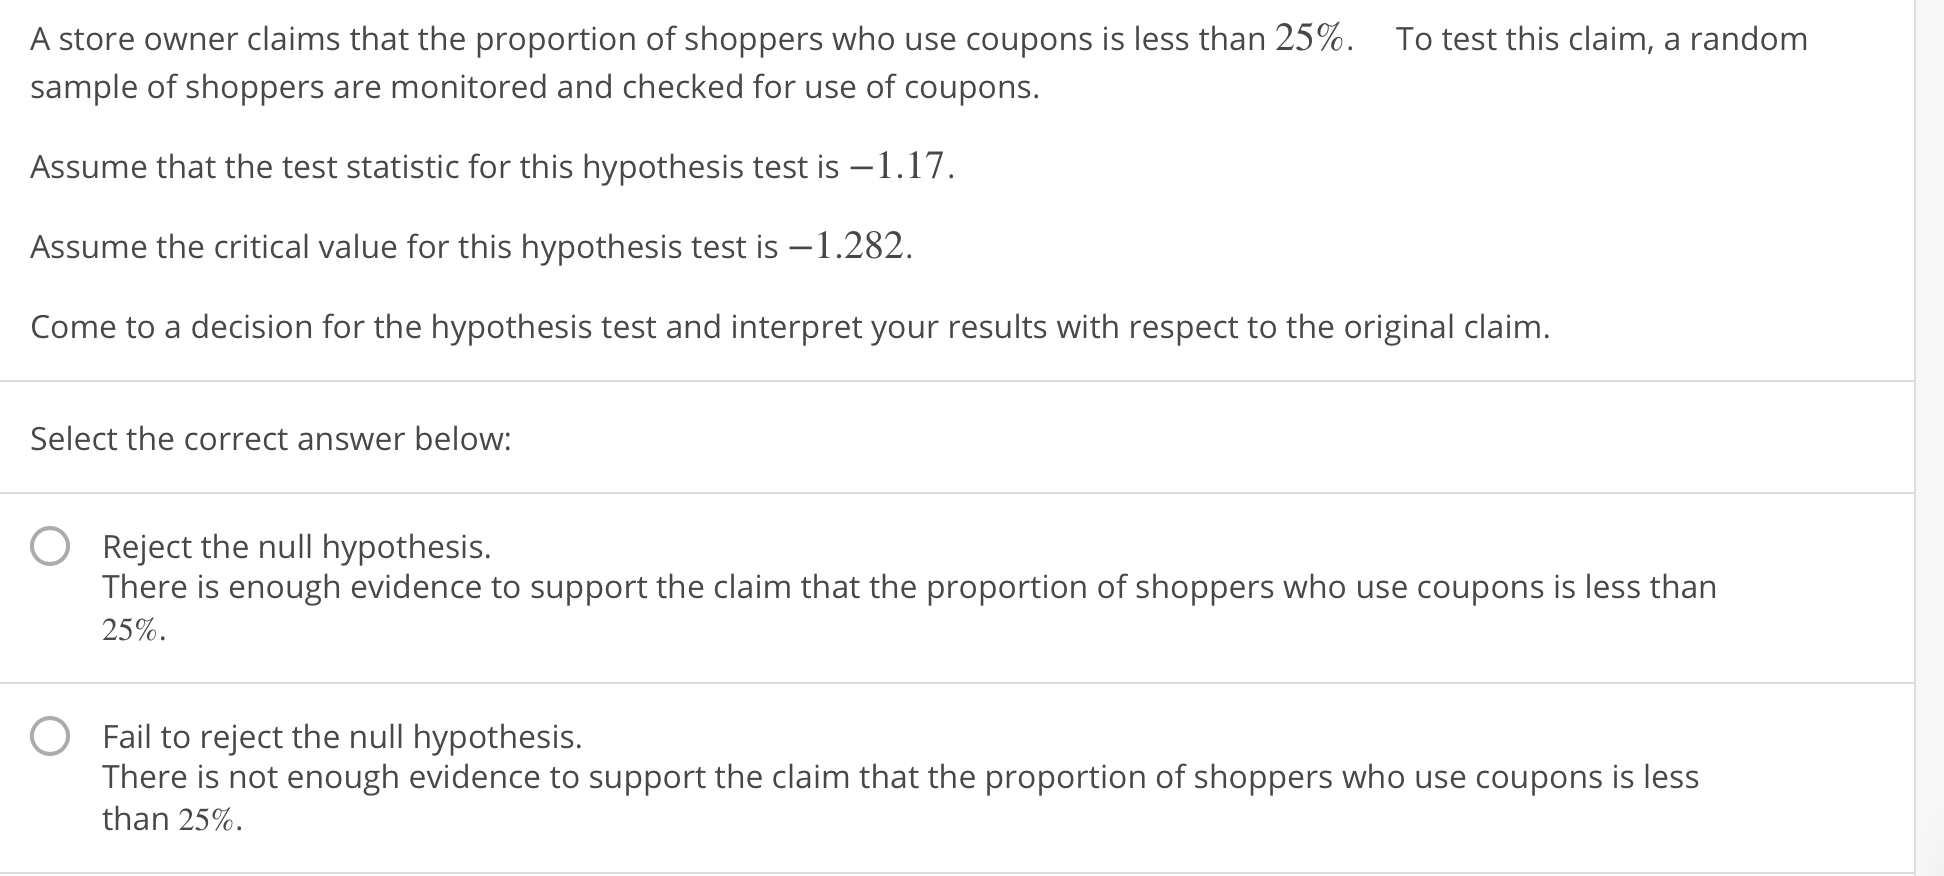 A store owner claims that the proportion of shoppers who use coupons is less than 25%.
To test this claim, a random
sample of shoppers are monitored and checked for use of coupons.
Assume that the test statistic for this hypothesis test is-1.17
Assume the critical value for this hypothesis test is -1.282.
Come to a decision for the hypothesis test and interpret your results with respect to the original claim.
Select the correct answer below
O Reject the null hypothesis.
There is enough evidence to support the claim that the proportion of shoppers who use coupons is less than
25%.
Fail to reject the null hypothesis.
There is not enough evidence to support the claim that the proportion of shoppers who use coupons is less
than 25%.
